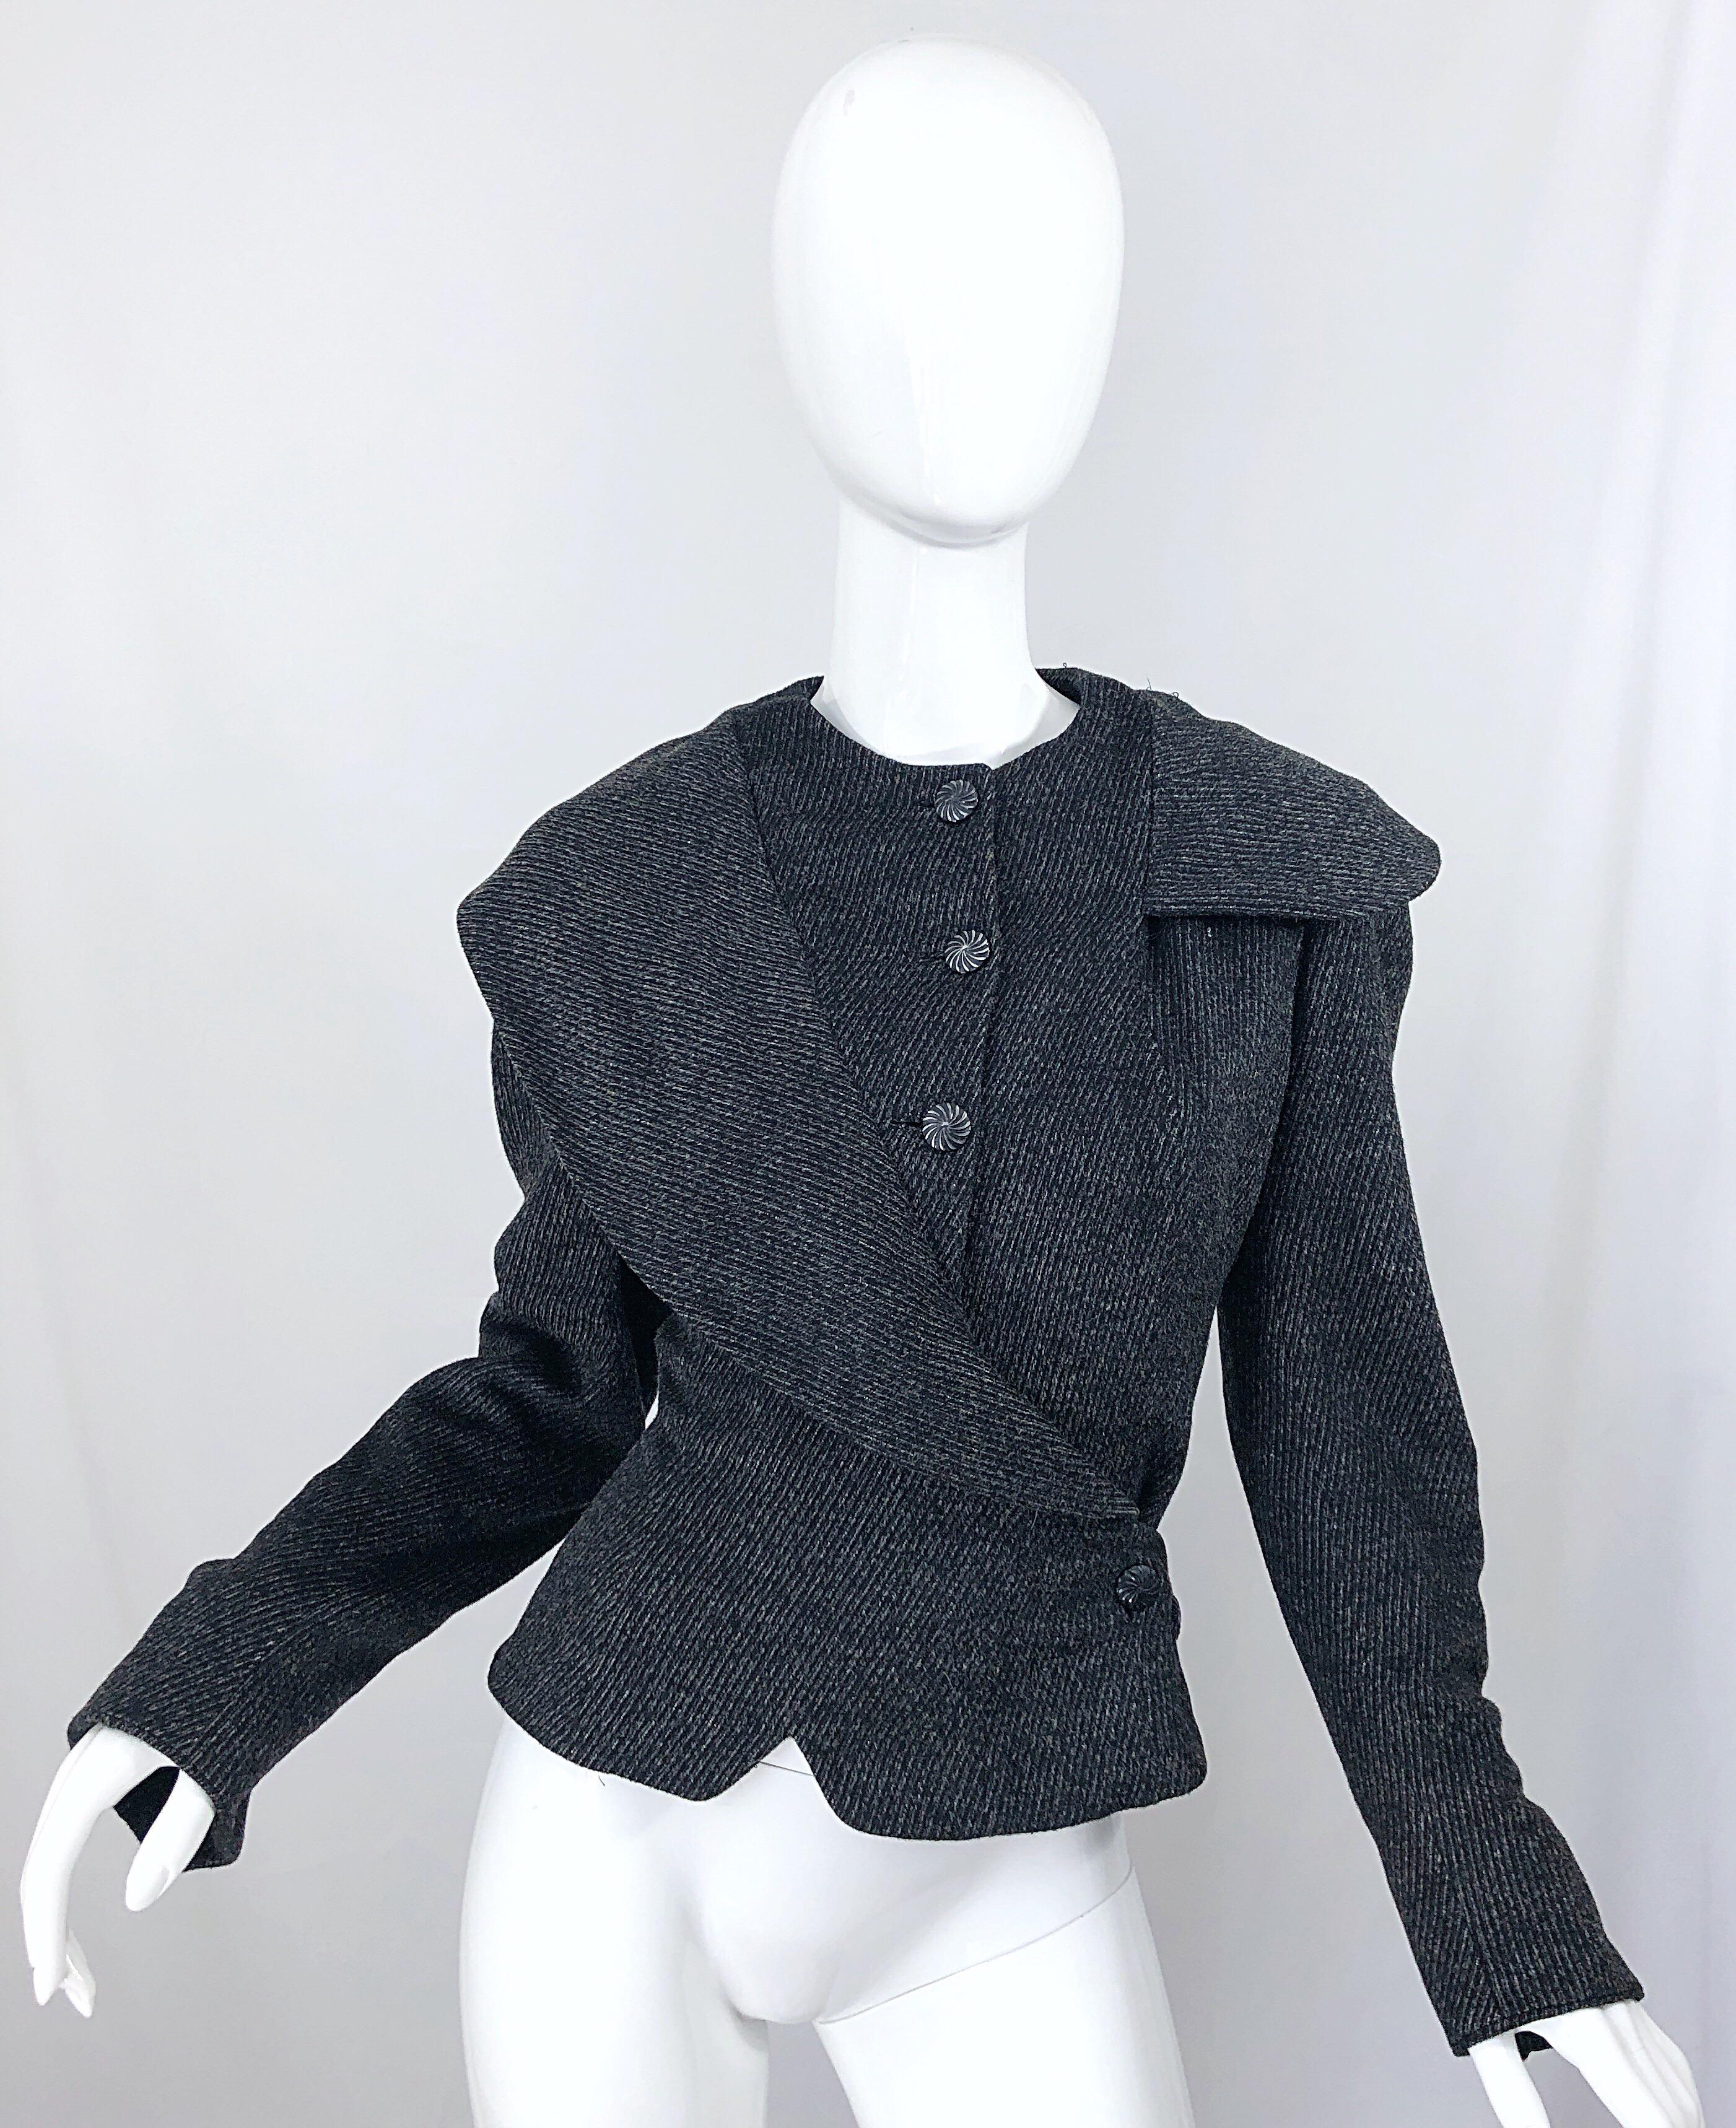 Avant Garde 1940s LILLI ANN gray wool jacket! Features a soft textured wool, and is fully lined. Wrap style sash snaps secure at back side. So much detail on this rare gem. Can easily be dressed up or down. Great with jeans, over a dress, or with